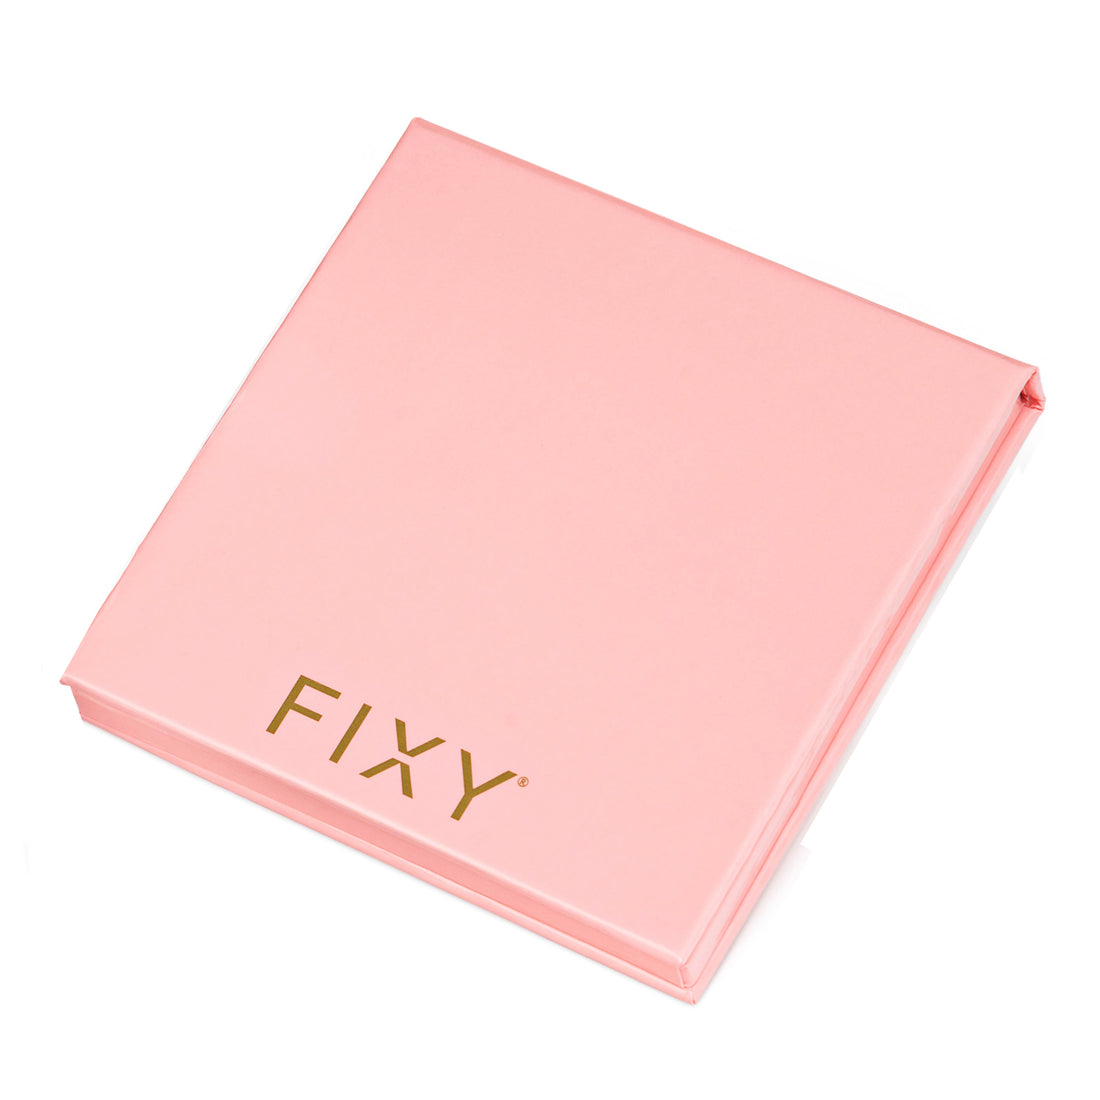 FIXY Small magnetic makeup palette